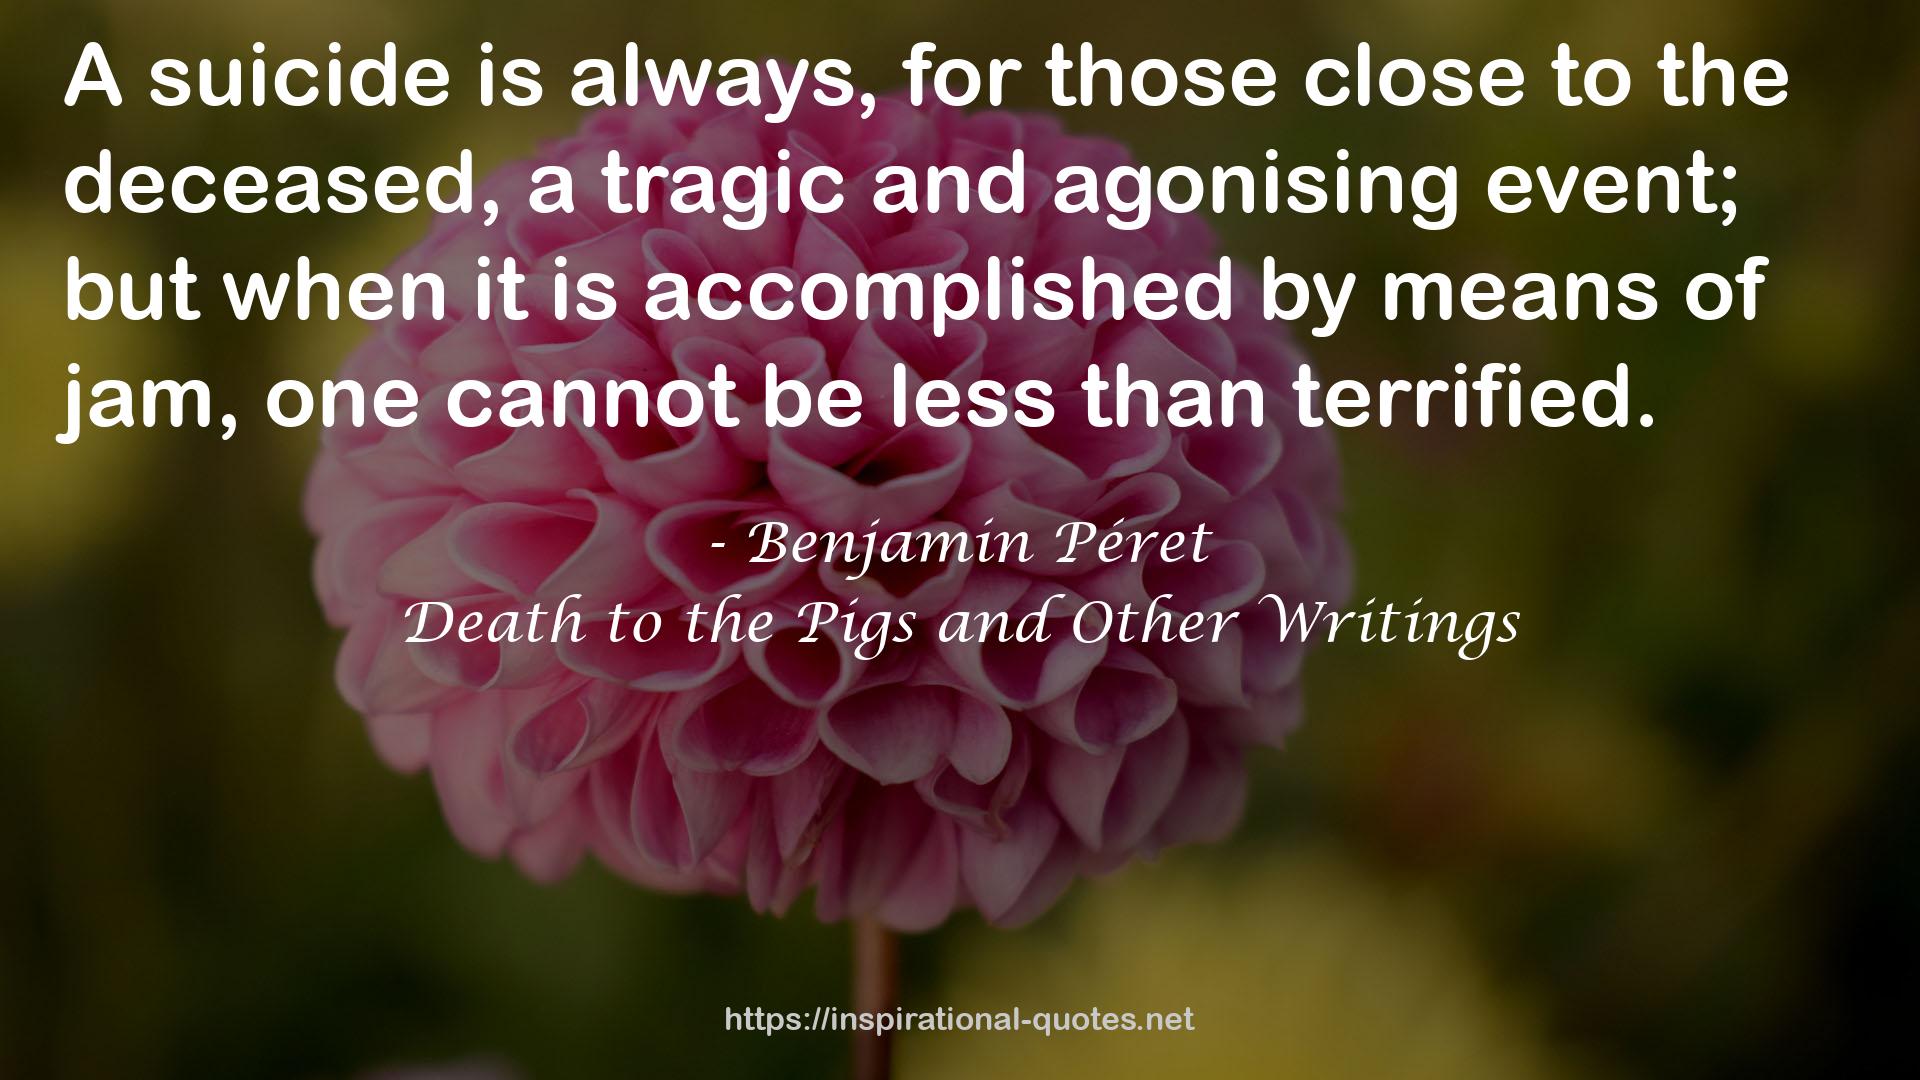 Death to the Pigs and Other Writings QUOTES